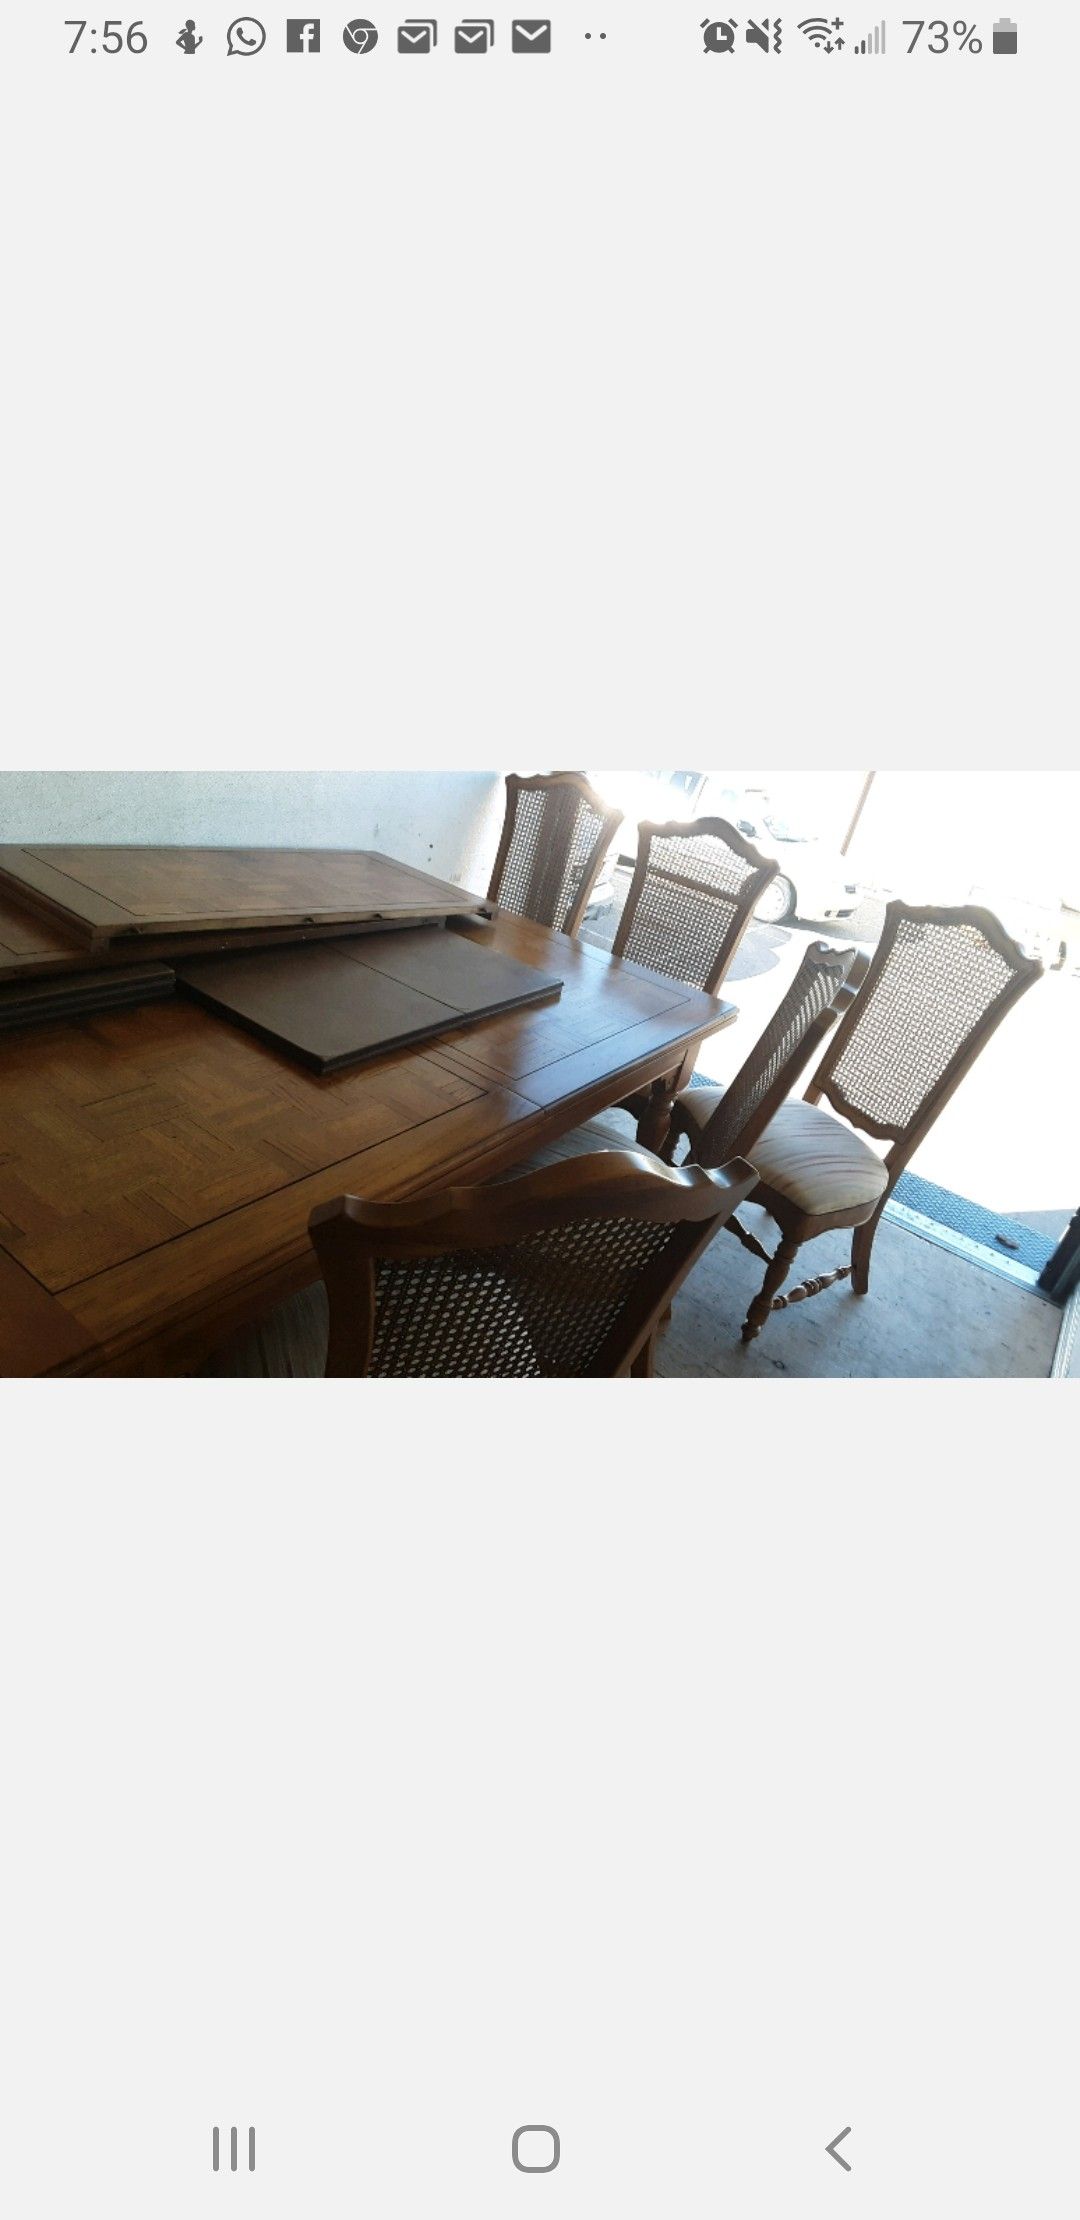 Maple wood table and 7 chairs